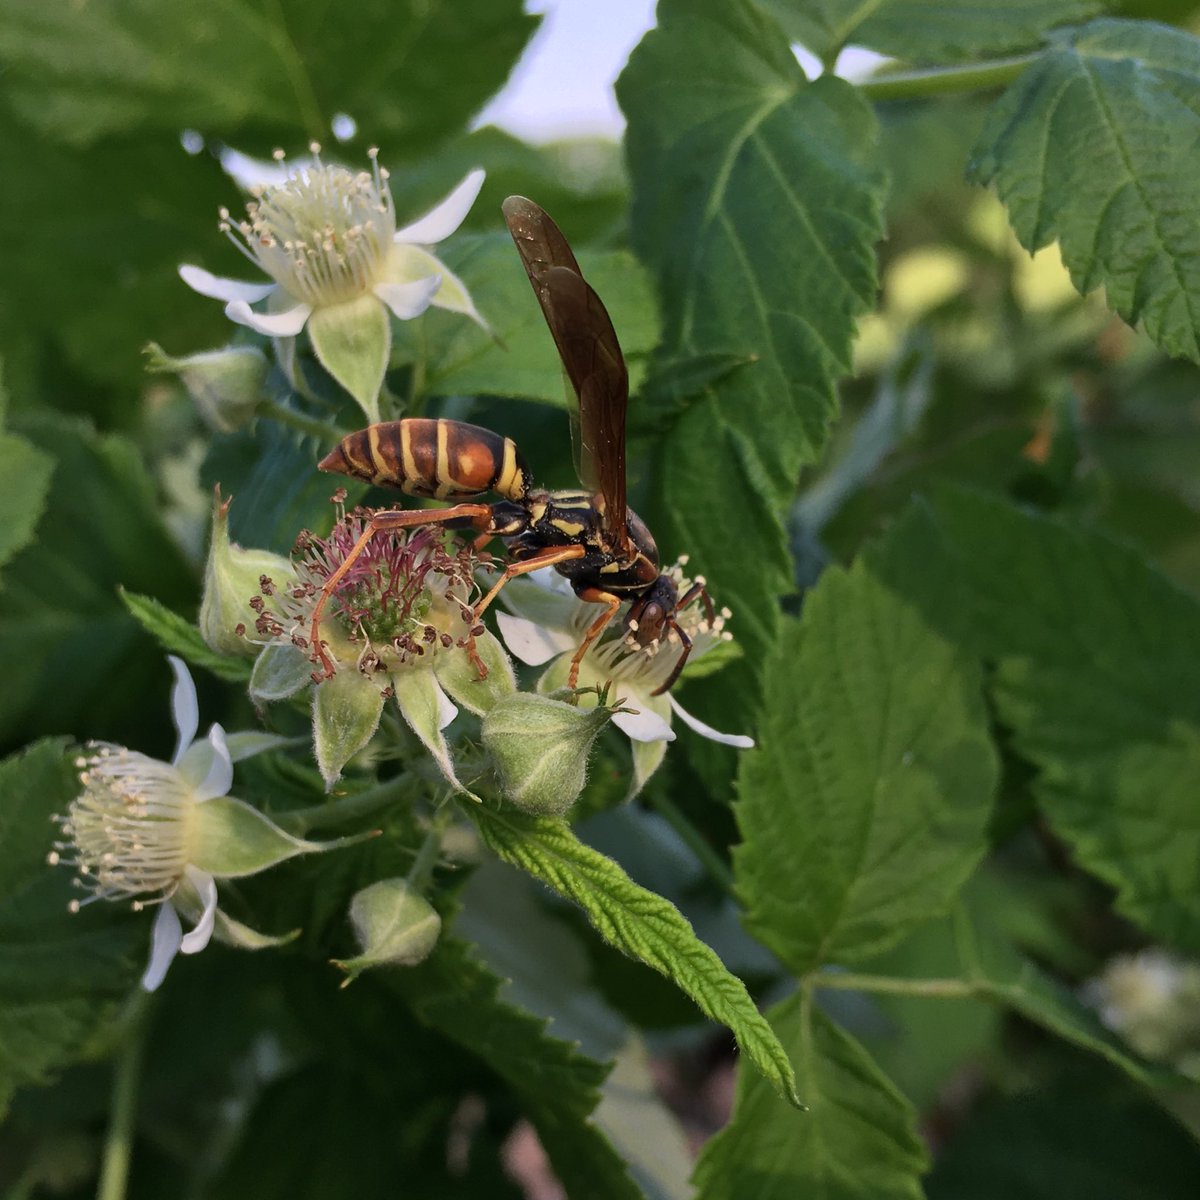 Adult wasps may be seen feeding on flowers like bees. Yellowjackets are also scavengers of meats and sweets later in the season.